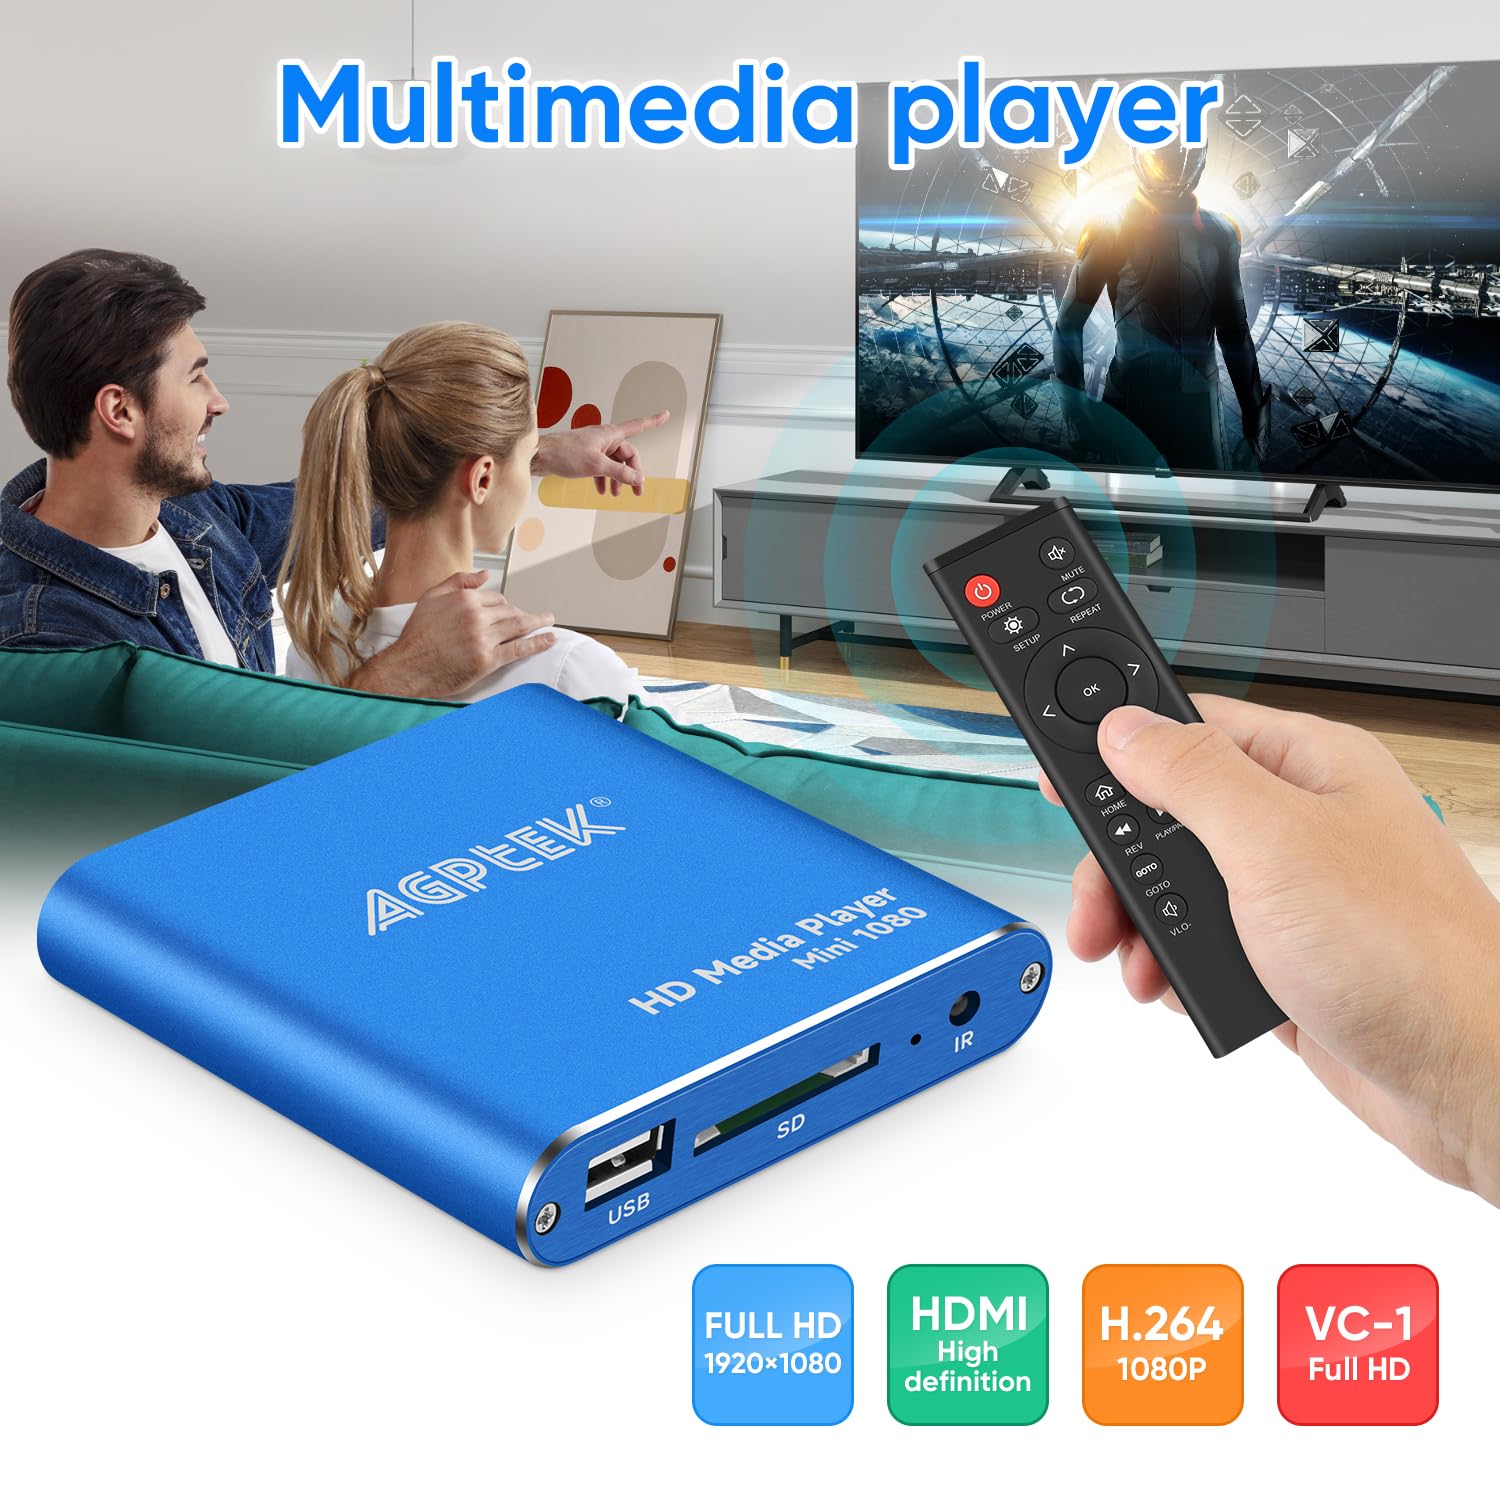 HDMI Media Player with One More Remote Control, Blue Mini 1080p Full-HD Ultra HDMI MP4 Player for -MKV/RM/ MP4 / AVI etc- HDD USB Flash Drive/HDD and SD Card